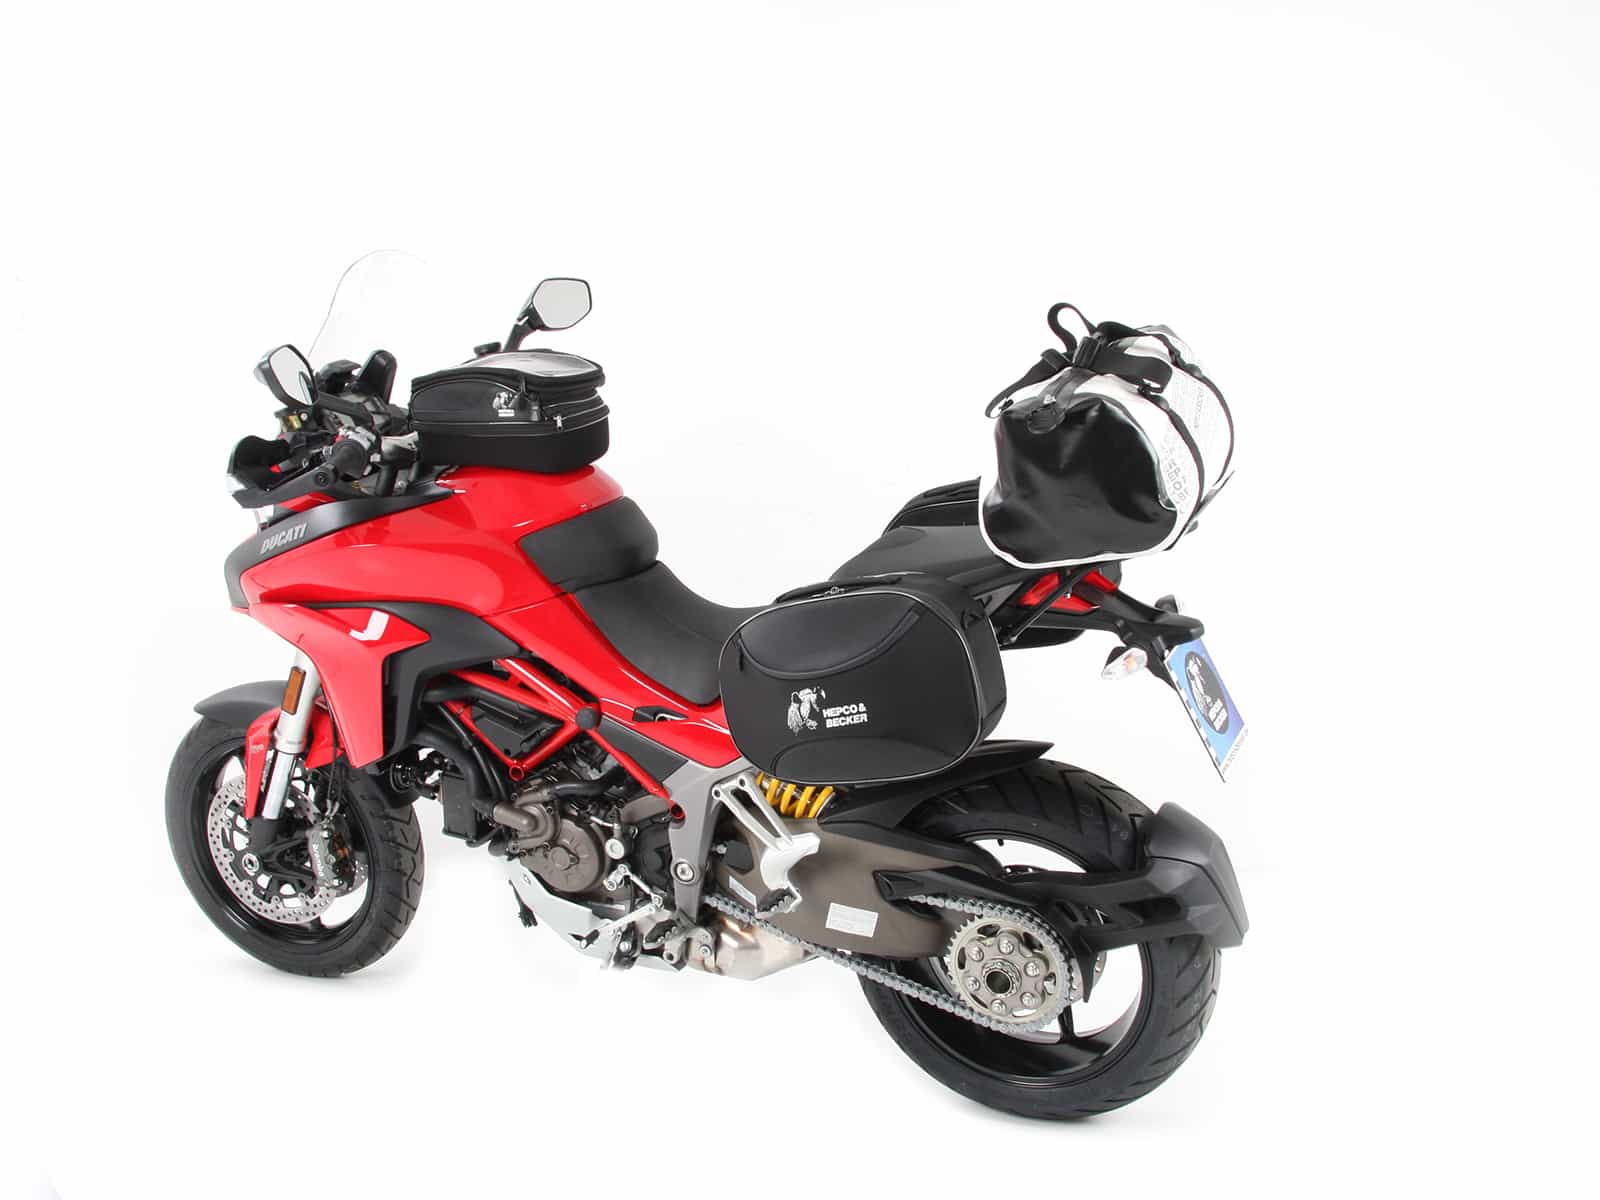 C-Bow sidecarrier for Ducati Multistrada 1200/S (2015-2017)